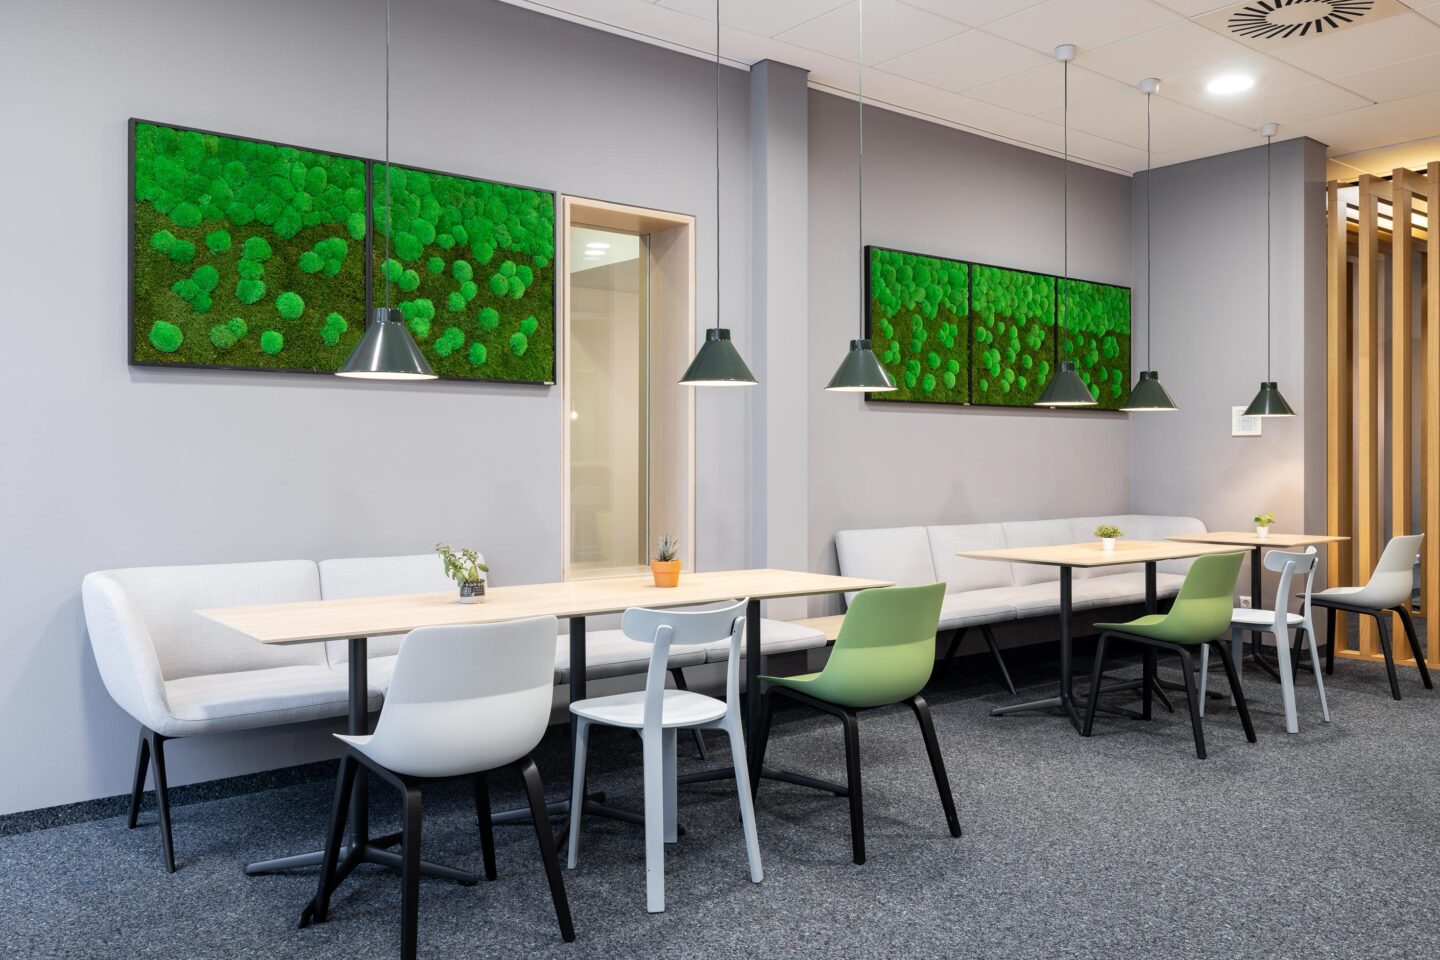 Workcafé FIZ Karlsruhe | plant pictures on the walls of the cafeteria